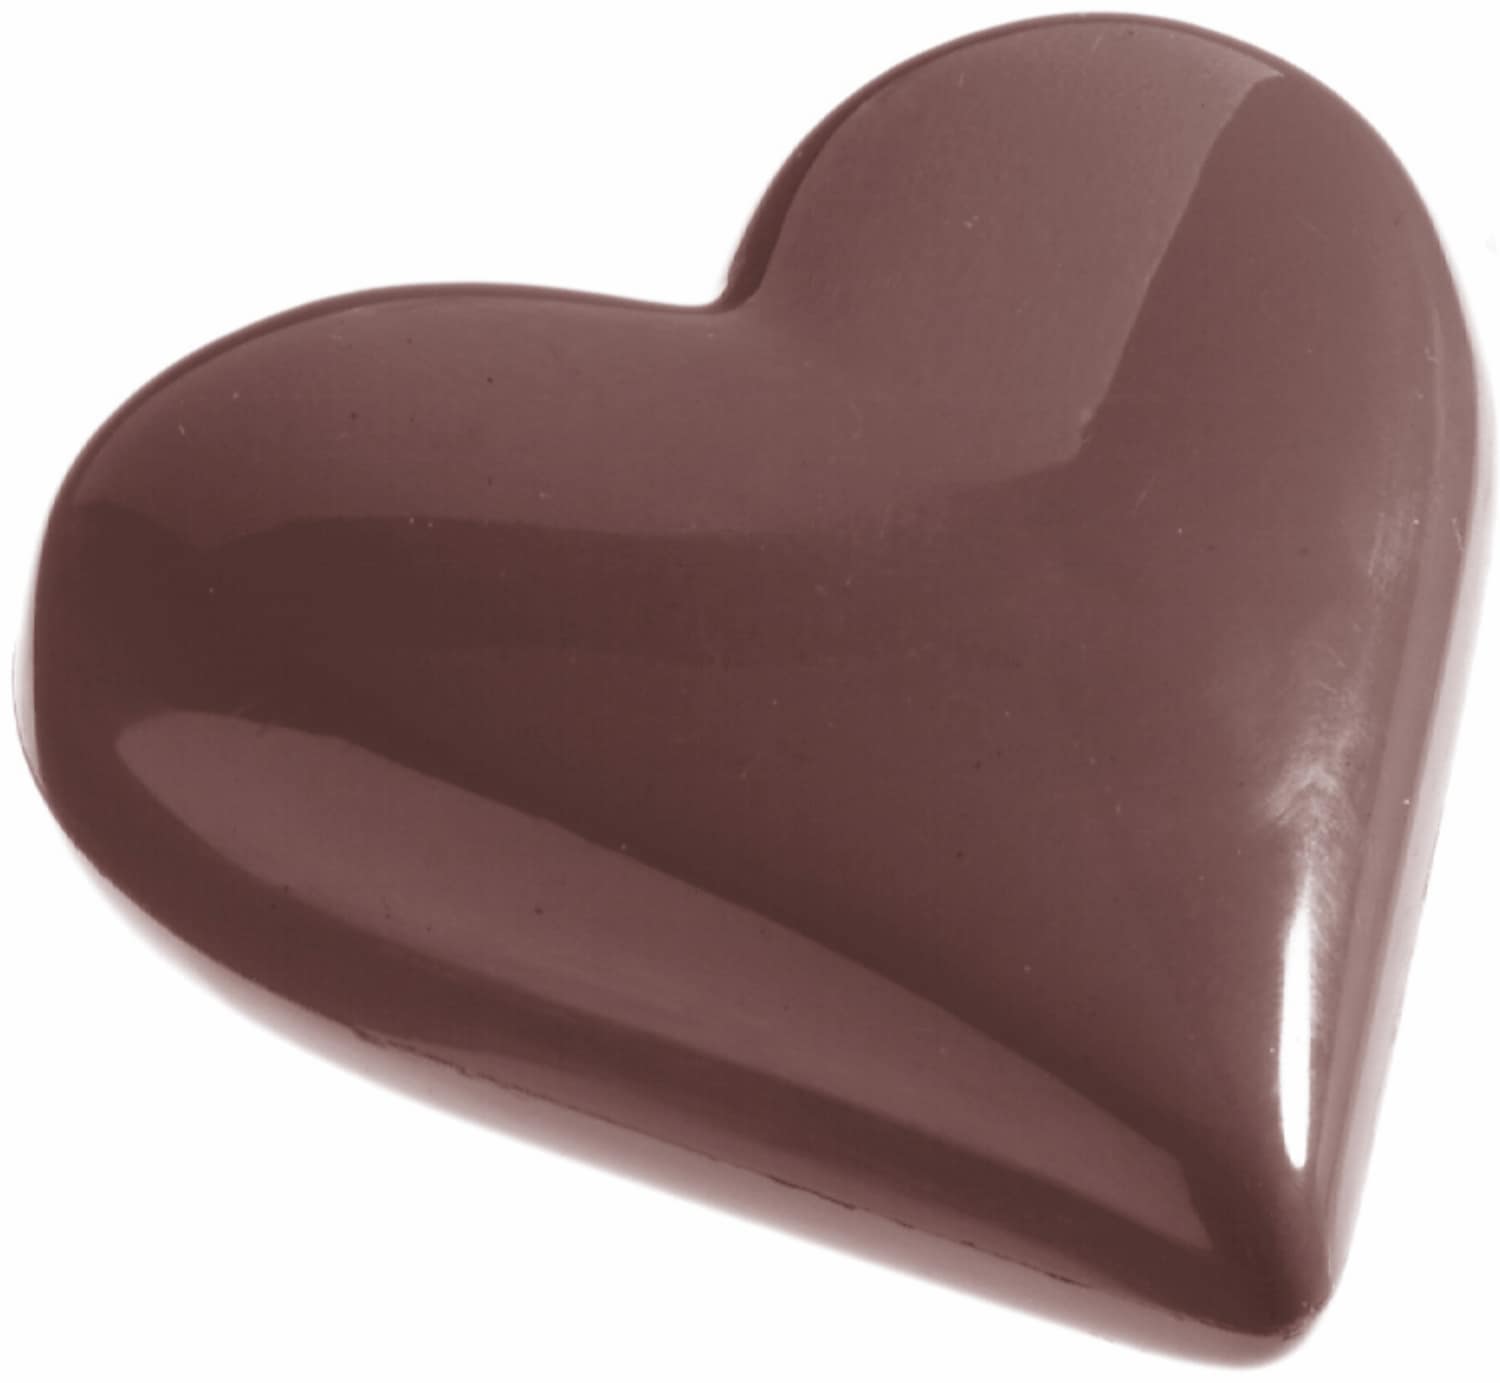 Chocolate mould "heart" 421147